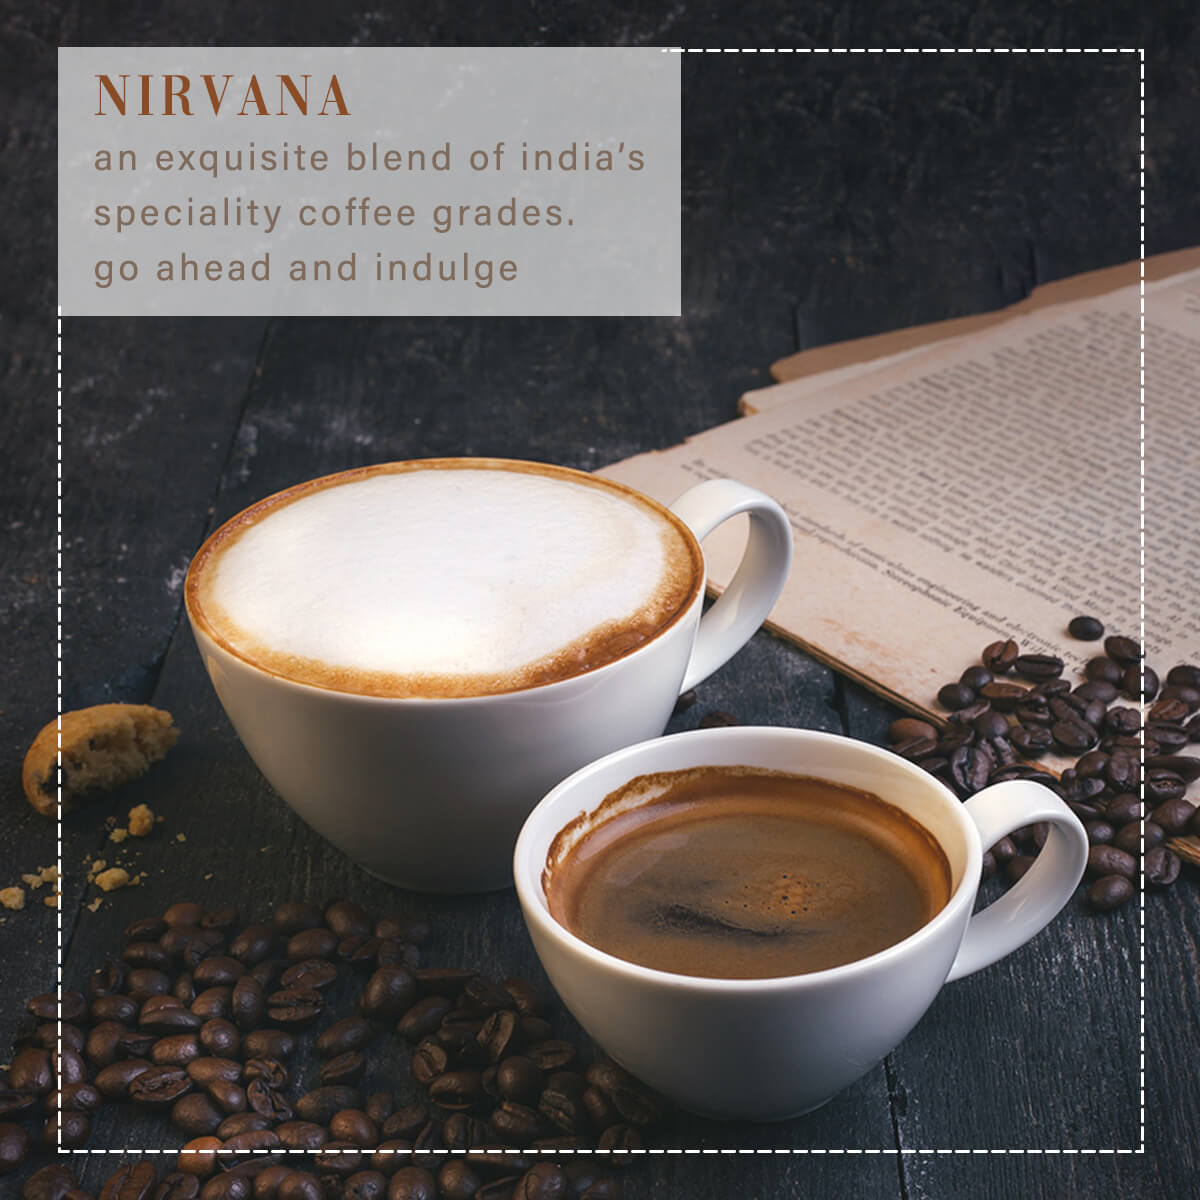 Nirvana | Roasted Specialty Coffee Beans | 200 Gms